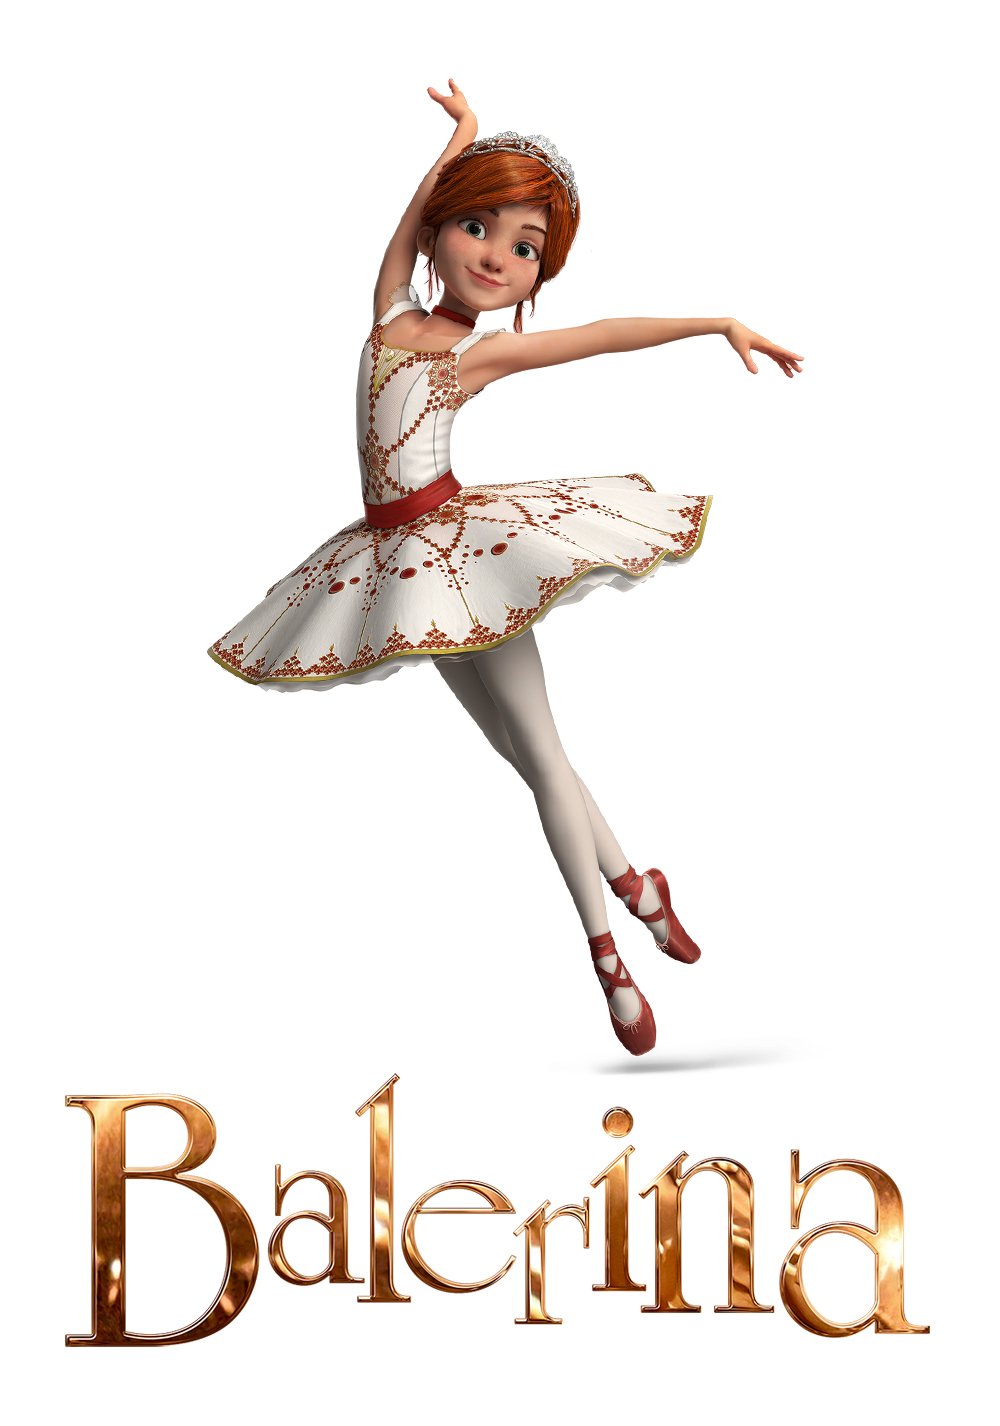  Ballerina Movie Poster ID 74158 Image Abyss